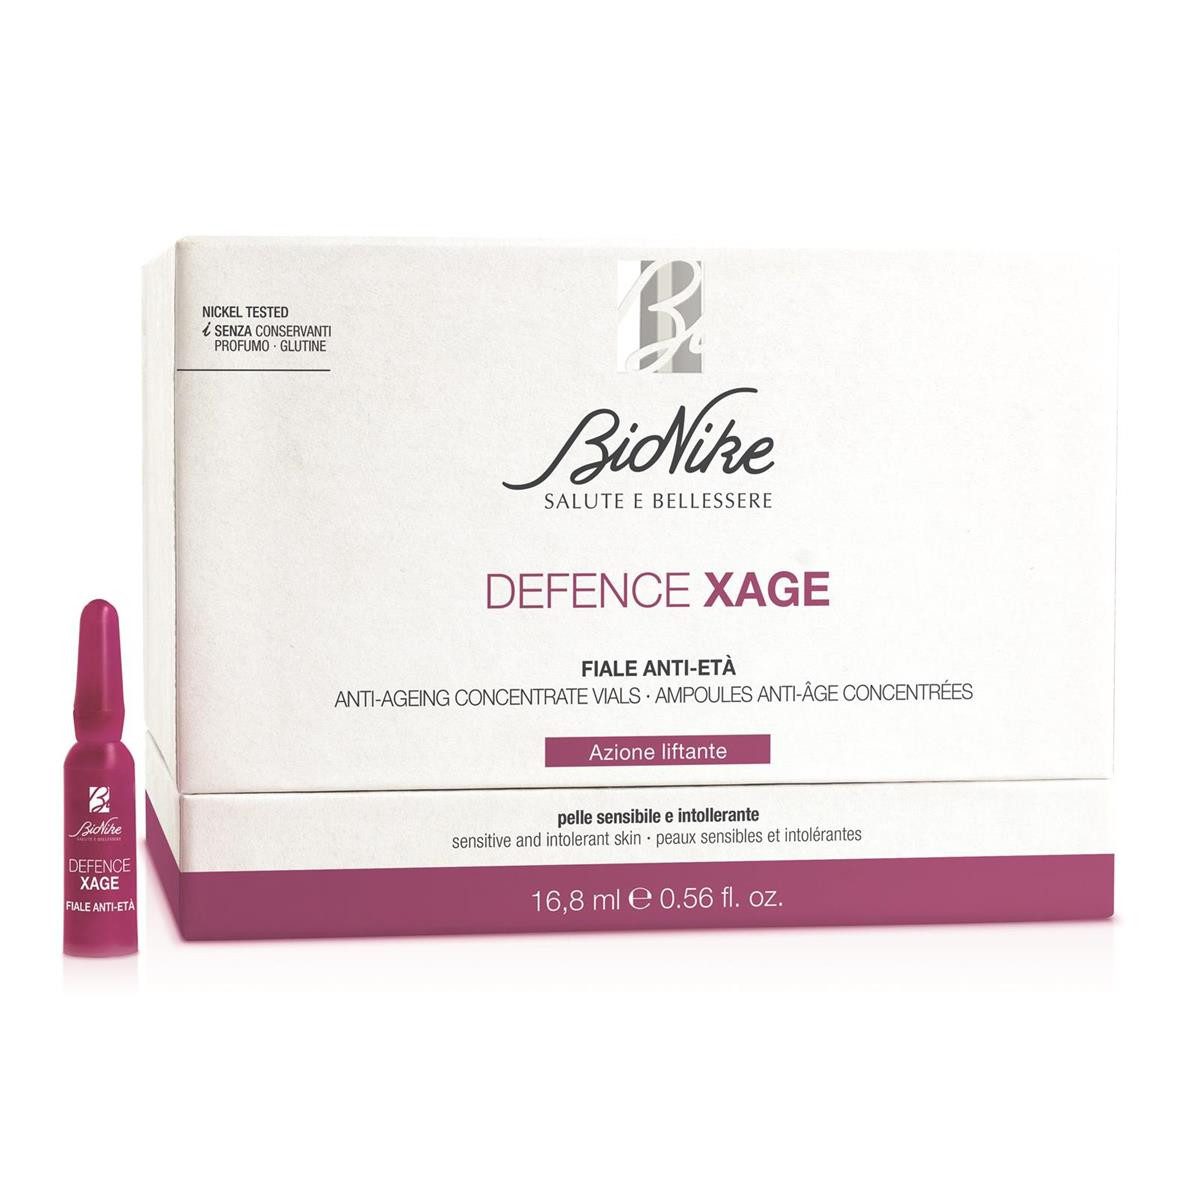 BioNike Anti-Aging-Creme DEFENCE XAGE Multi-Corrective Anti-Ageing Concentrated Vials